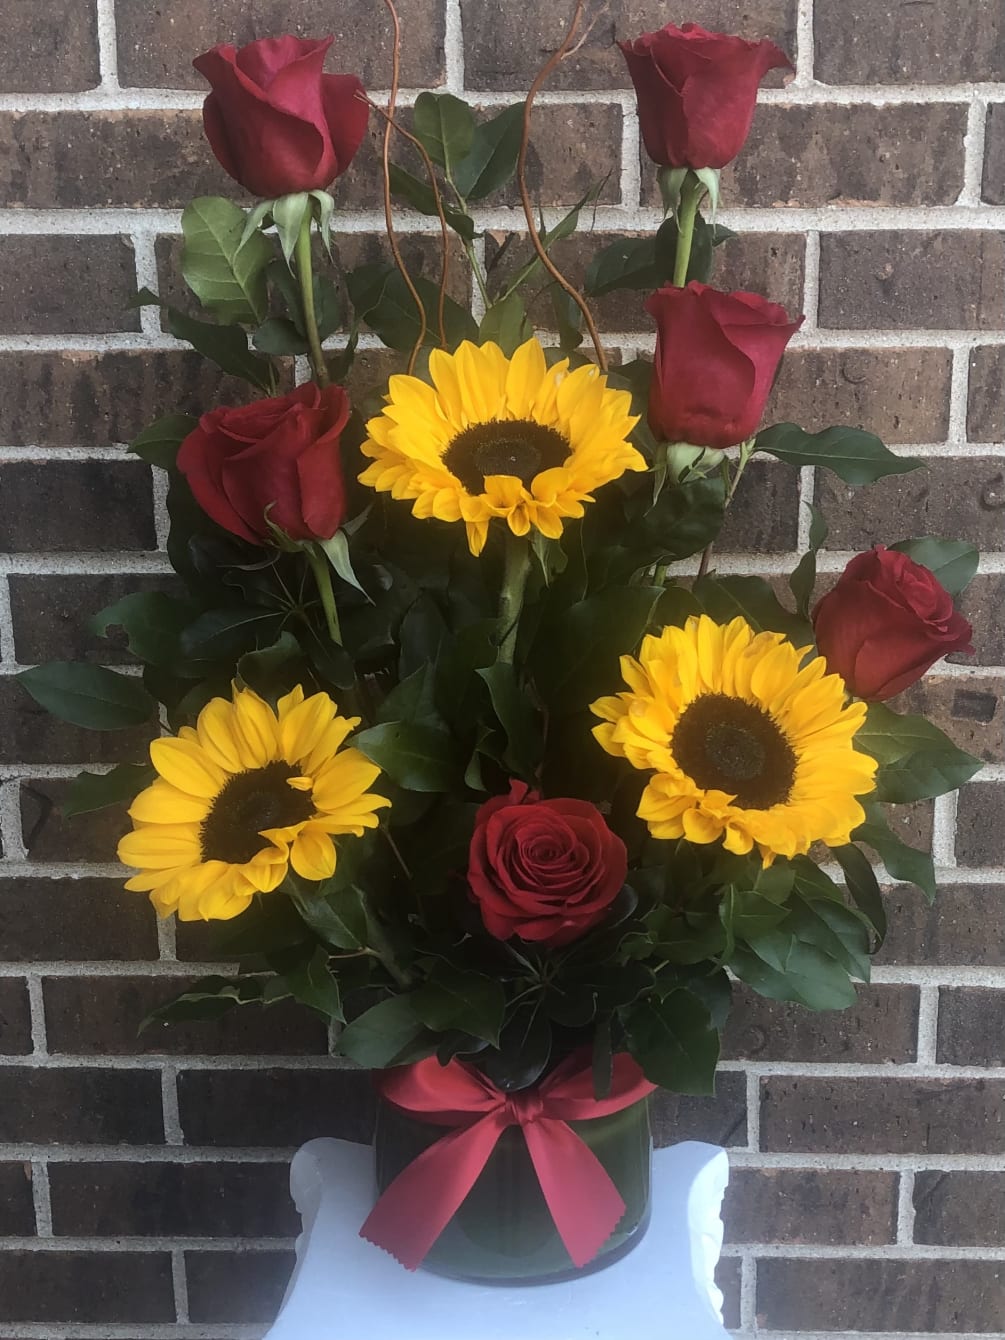 !/2 dozen roses with sunflowers and foliage in a vase with red